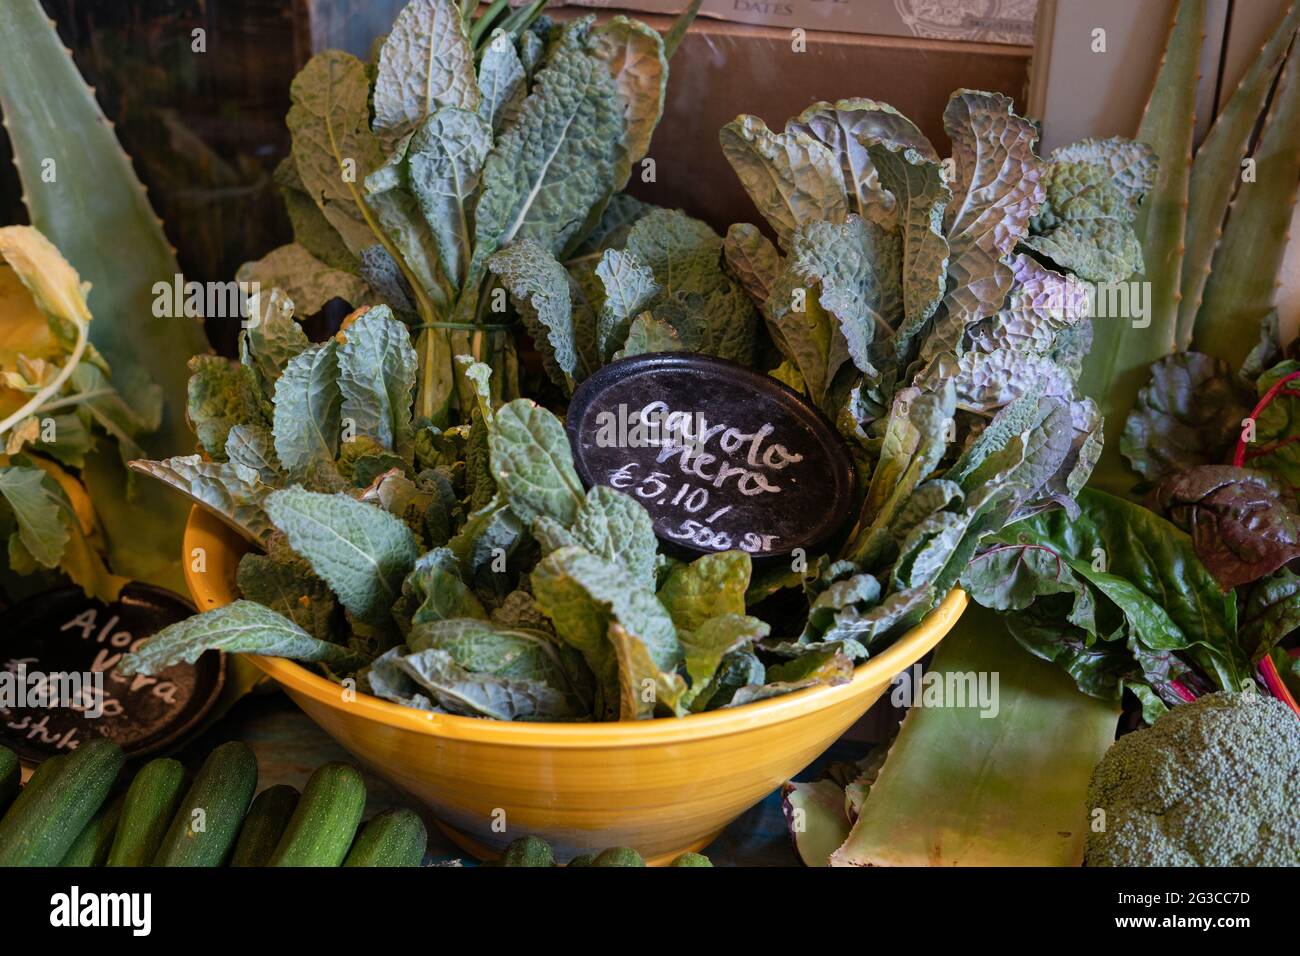 A variety of fresh vegetables displayed in a bowl with cavolo nero or Tuscan kale or black kale Stock Photo